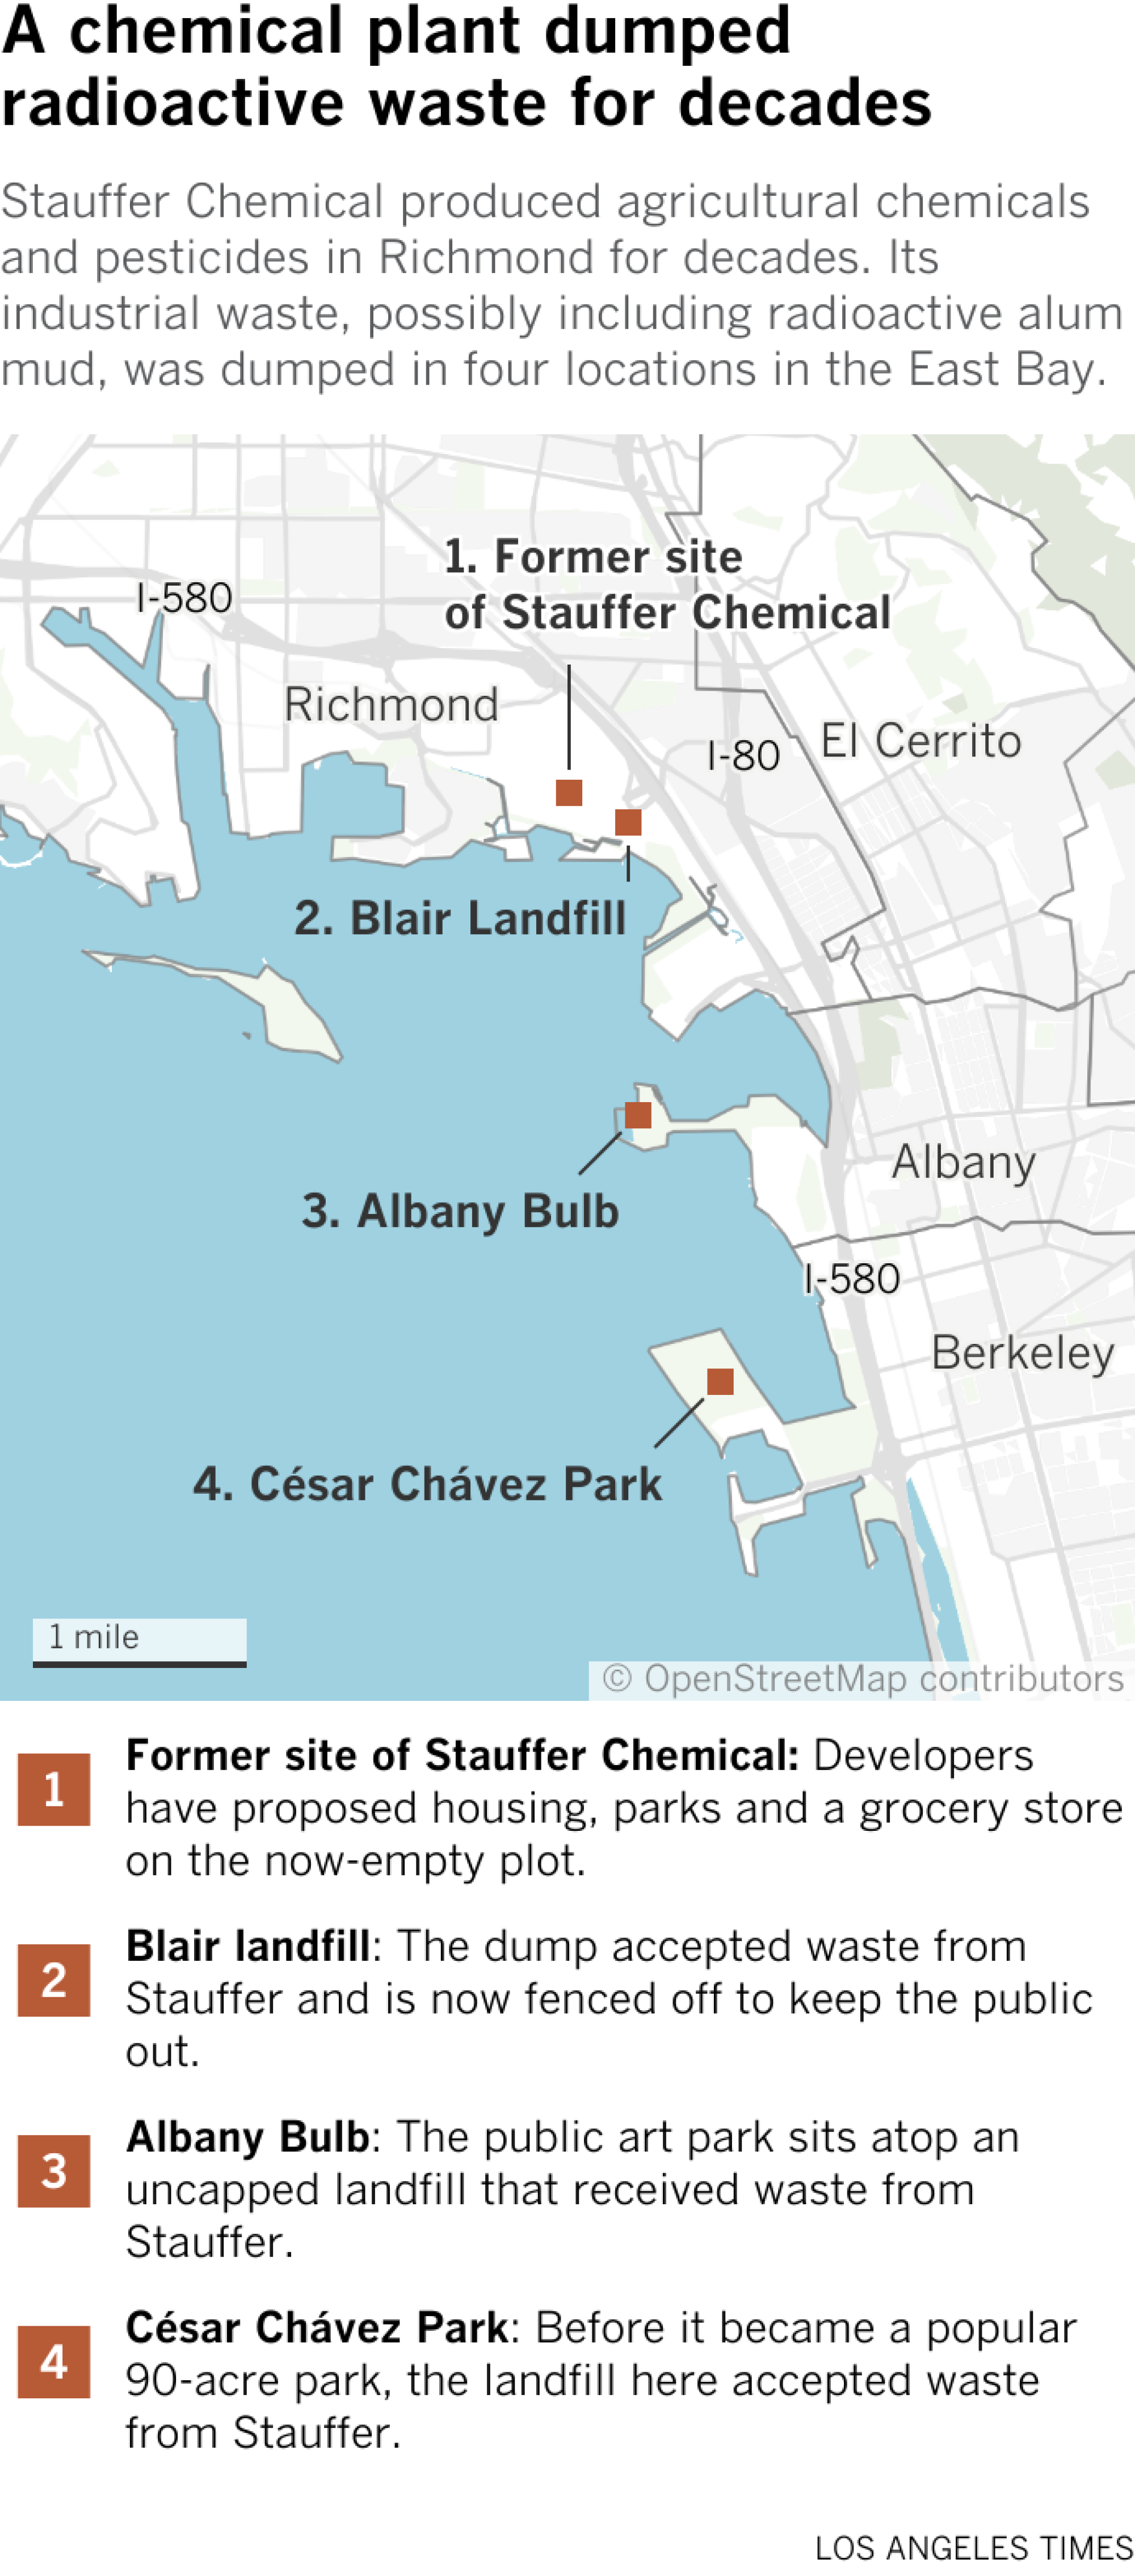 Map locates the site of the former Stauffer Chemical Co. and the Blair landfill; the Albany Bulb; and Cesar Chavez Park.